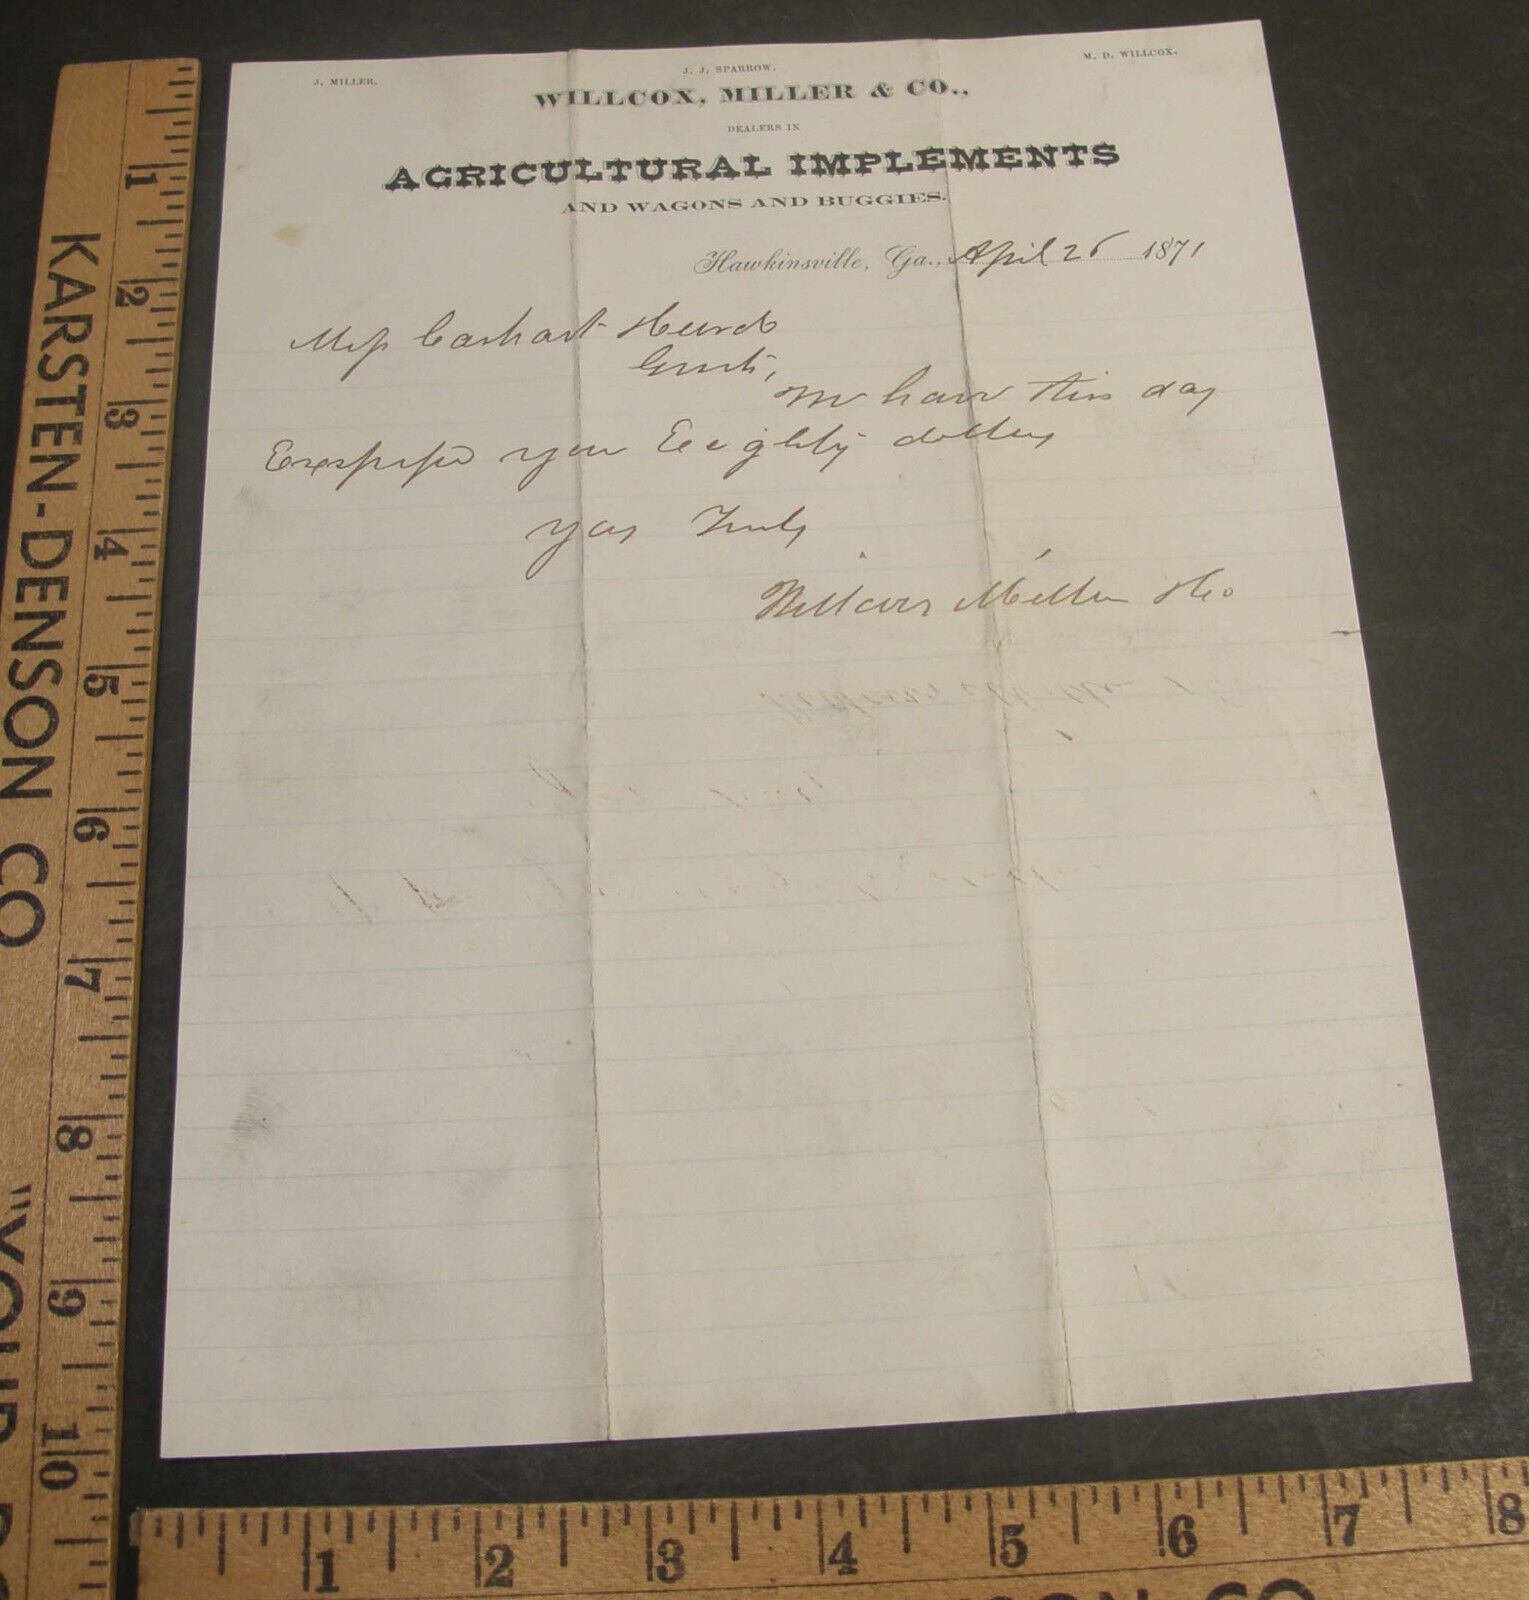 ANTIQUE LETTERHEAD WILLCOX MILLER & CO AGRICULTURAL IMPLEMENTS HAWKINSVILLE GA